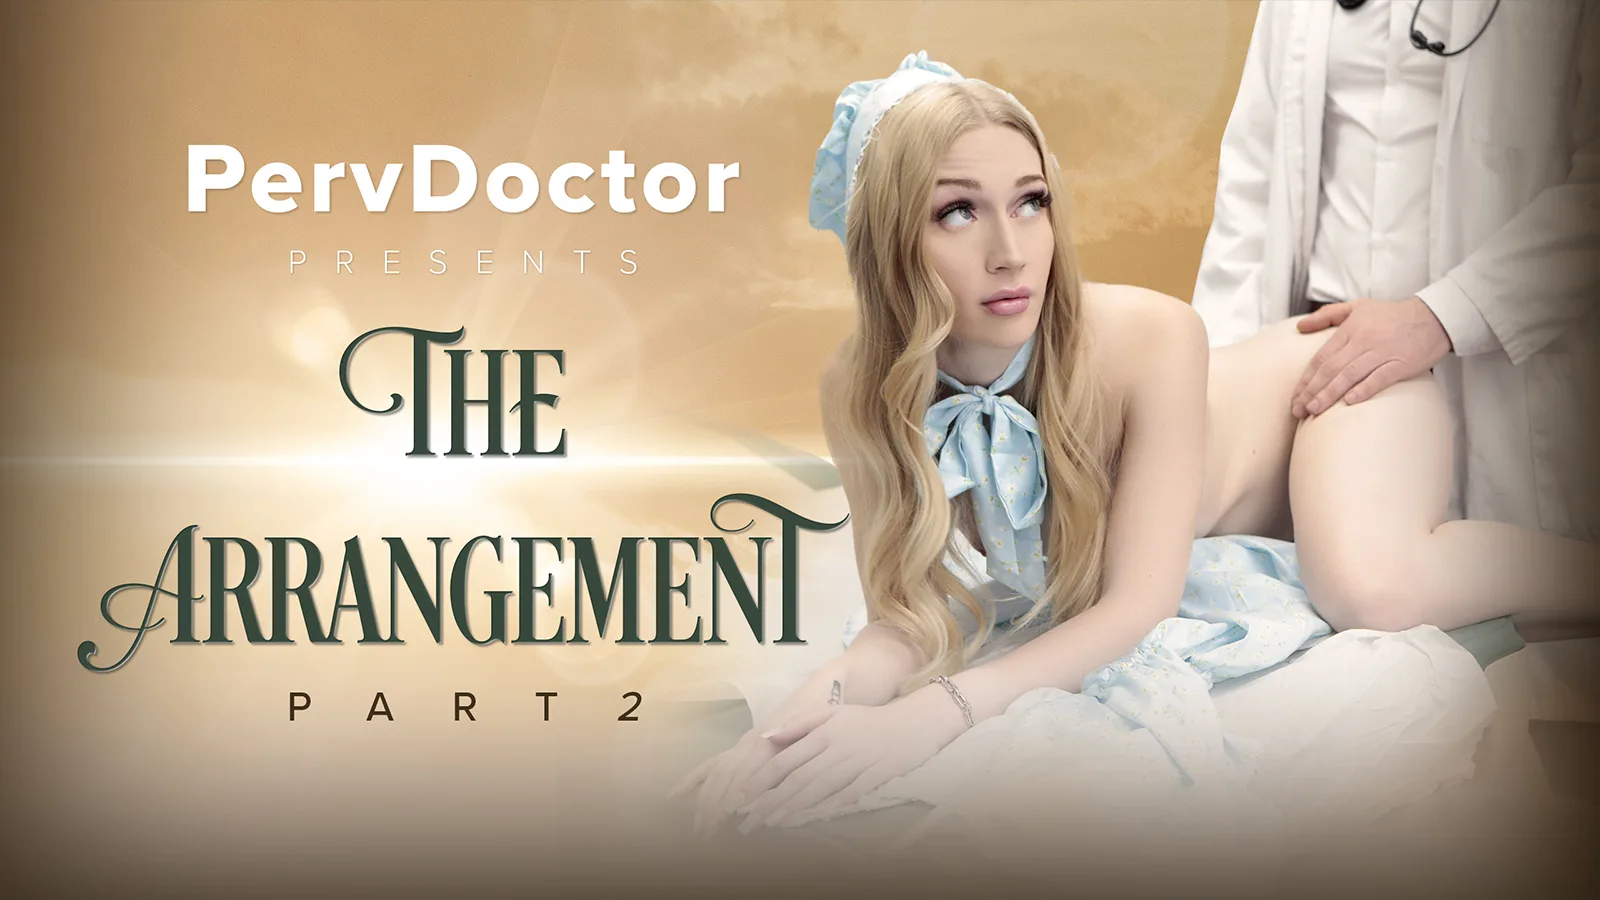 The Arrangement Part 2: Her First Medical Check - PervDoctor